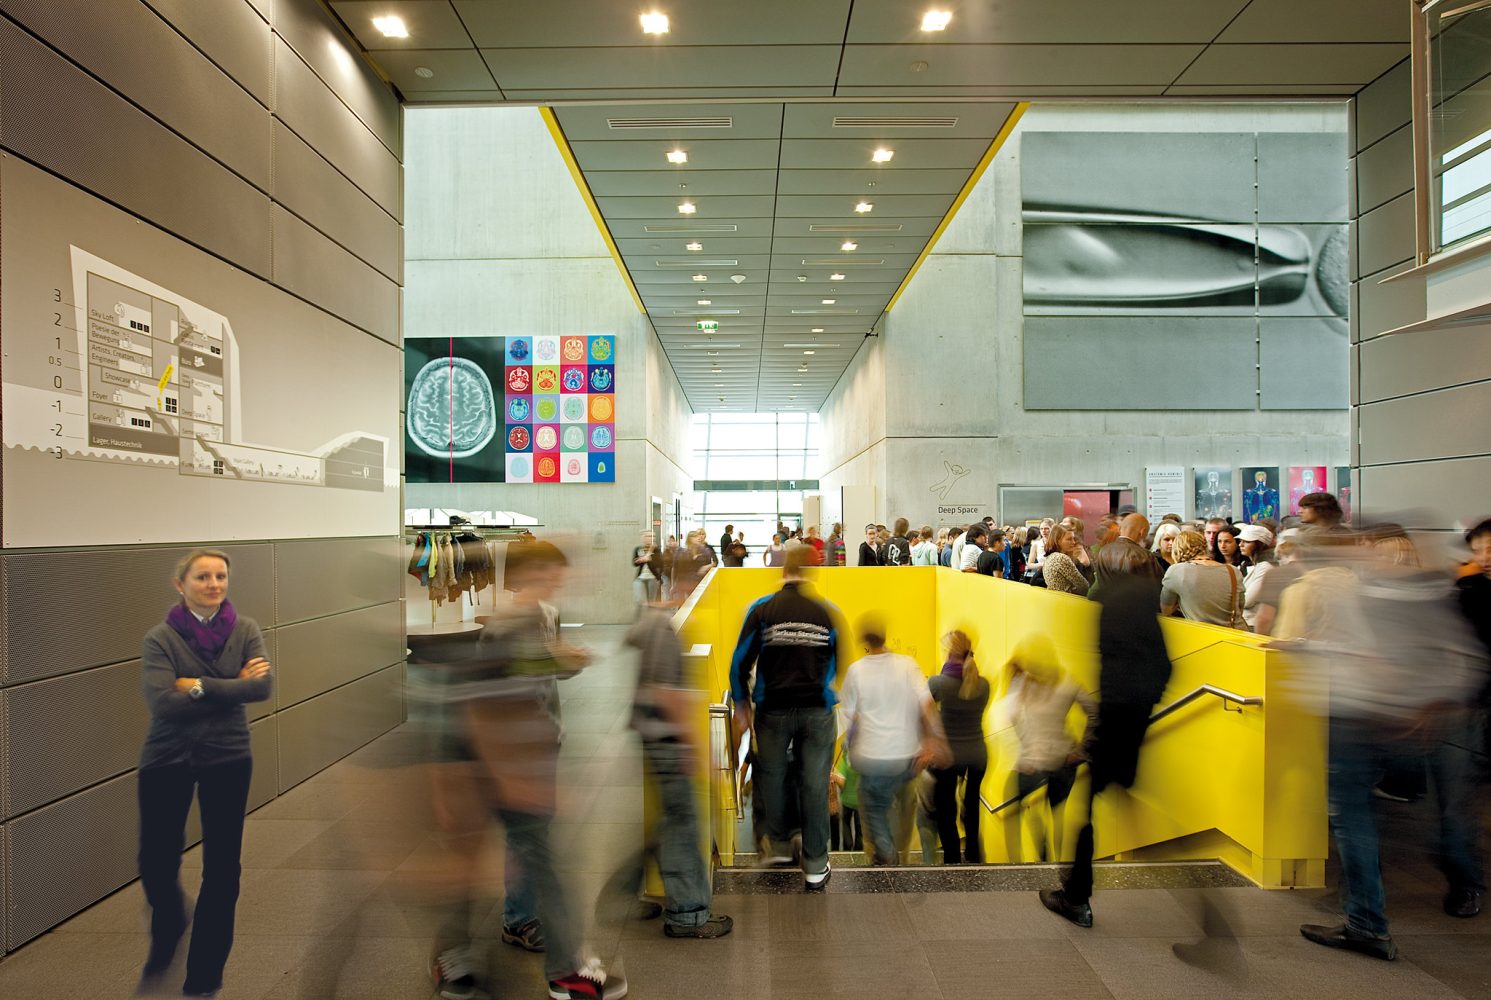 People in the Ars Electronica Center